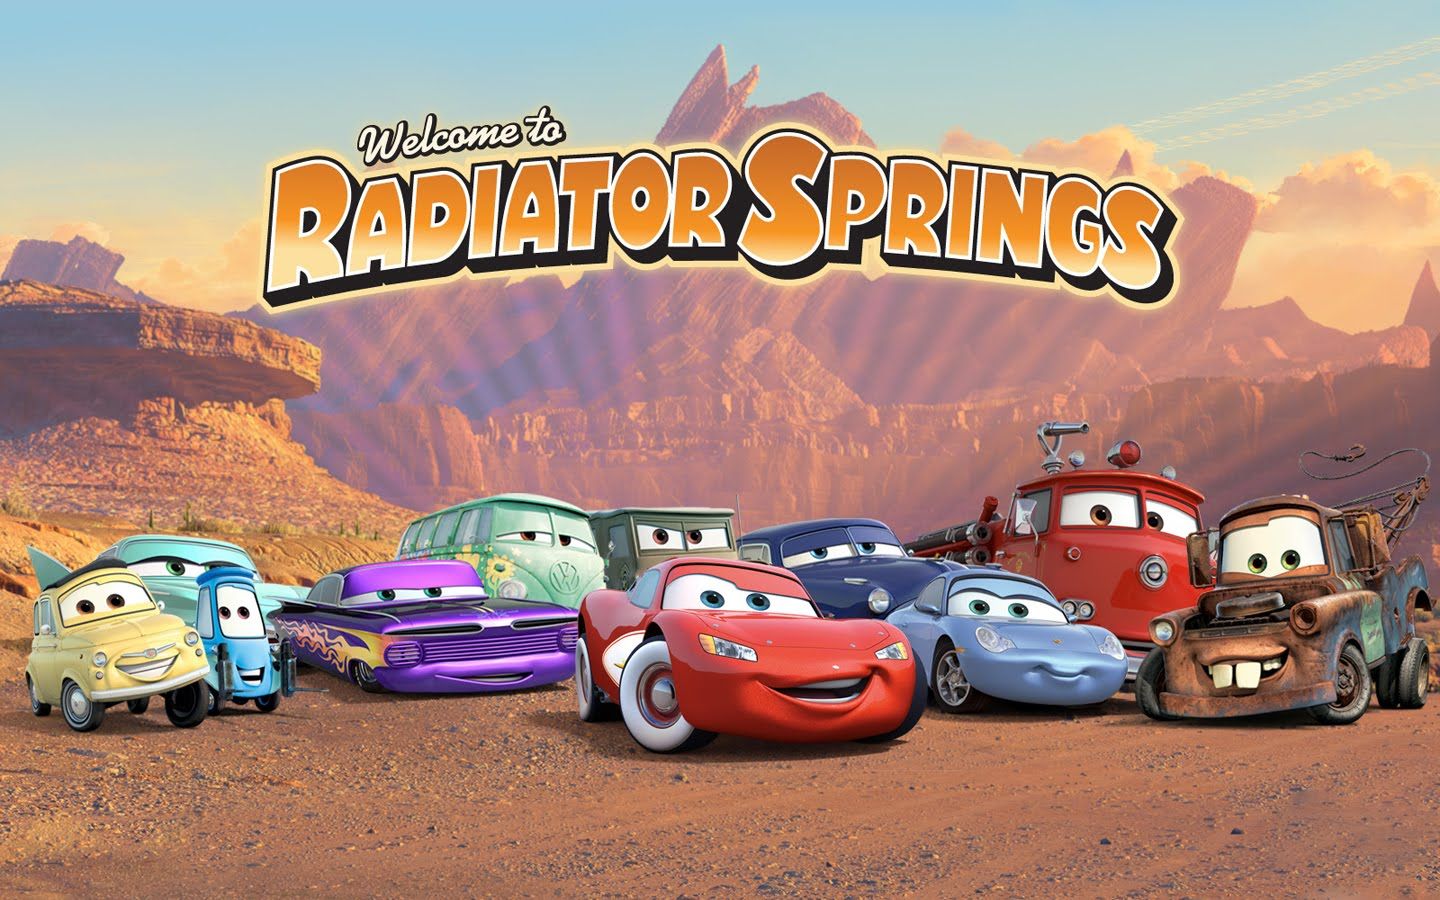 The Cars Background. Awesome Cars Wallpaper, Disney Cars Wallpaper and Cool Cars Wallpaper